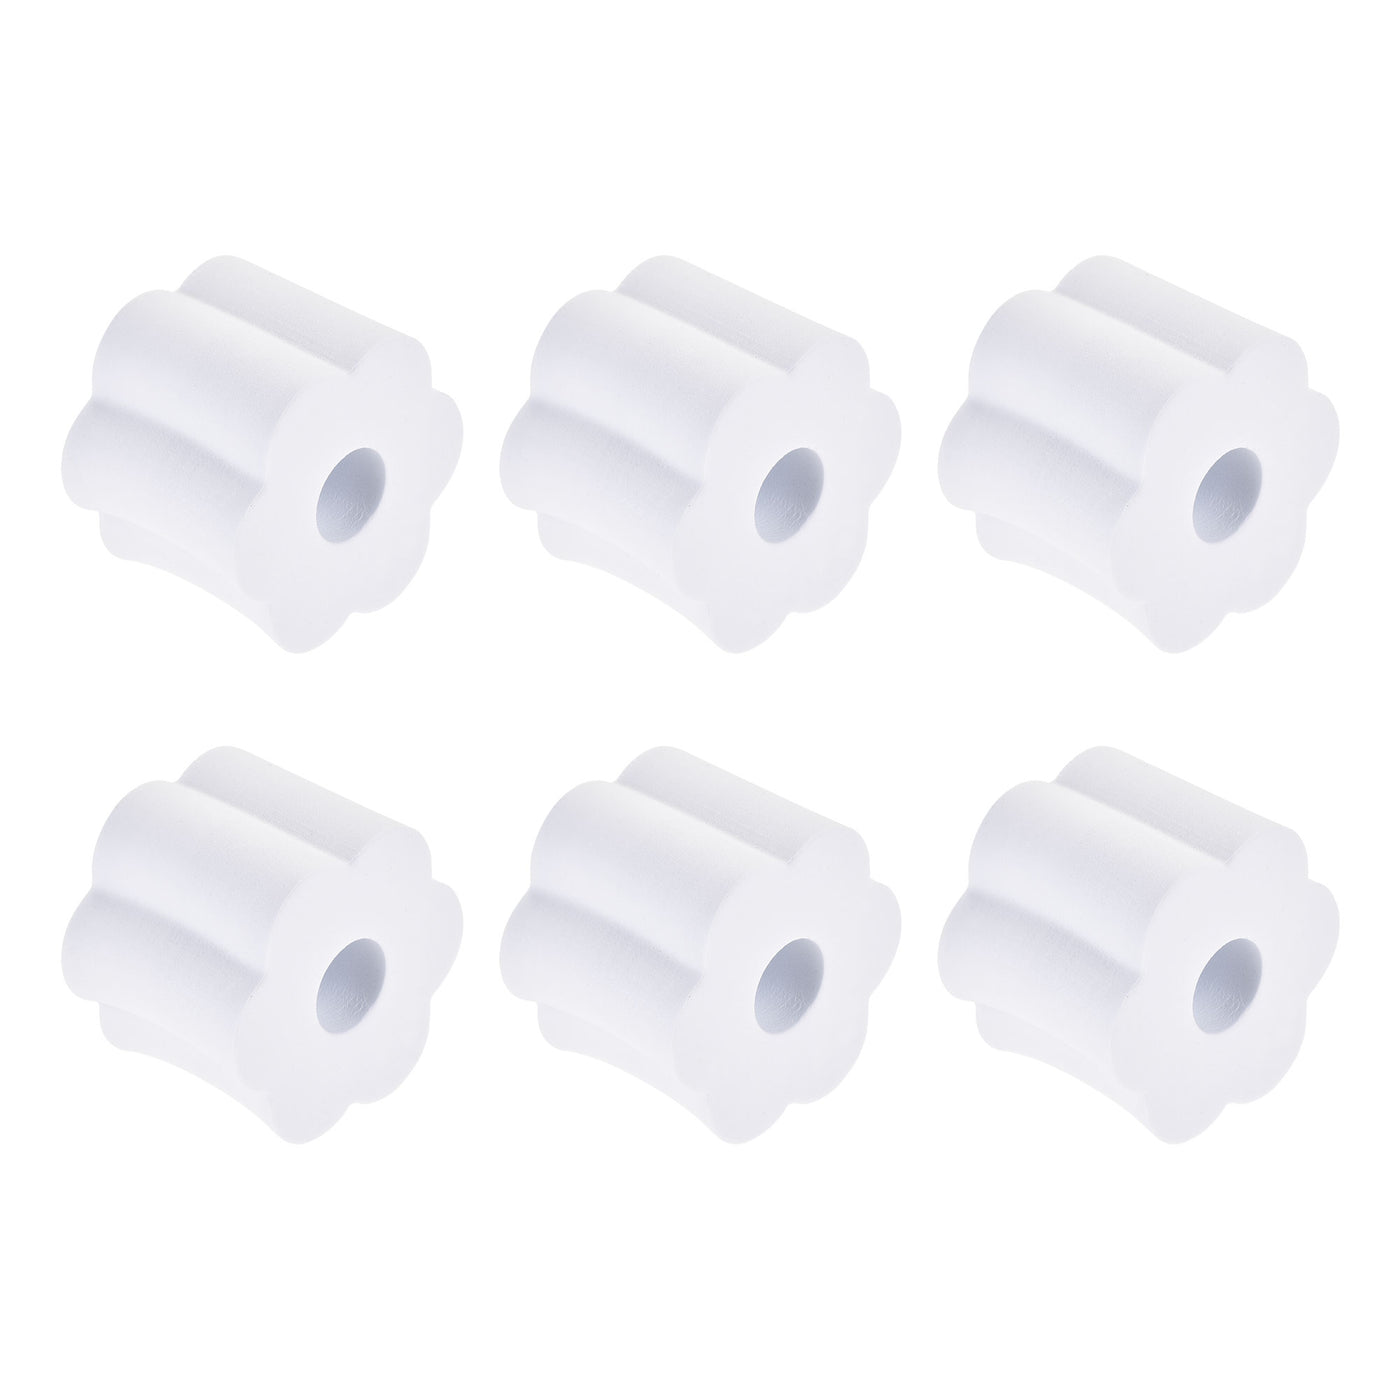 Uxcell Uxcell Cup Turner Foam 2.44 Inch Diameter Foam Inserts White for 3/4 Inch PVC Pipe 6Pcs